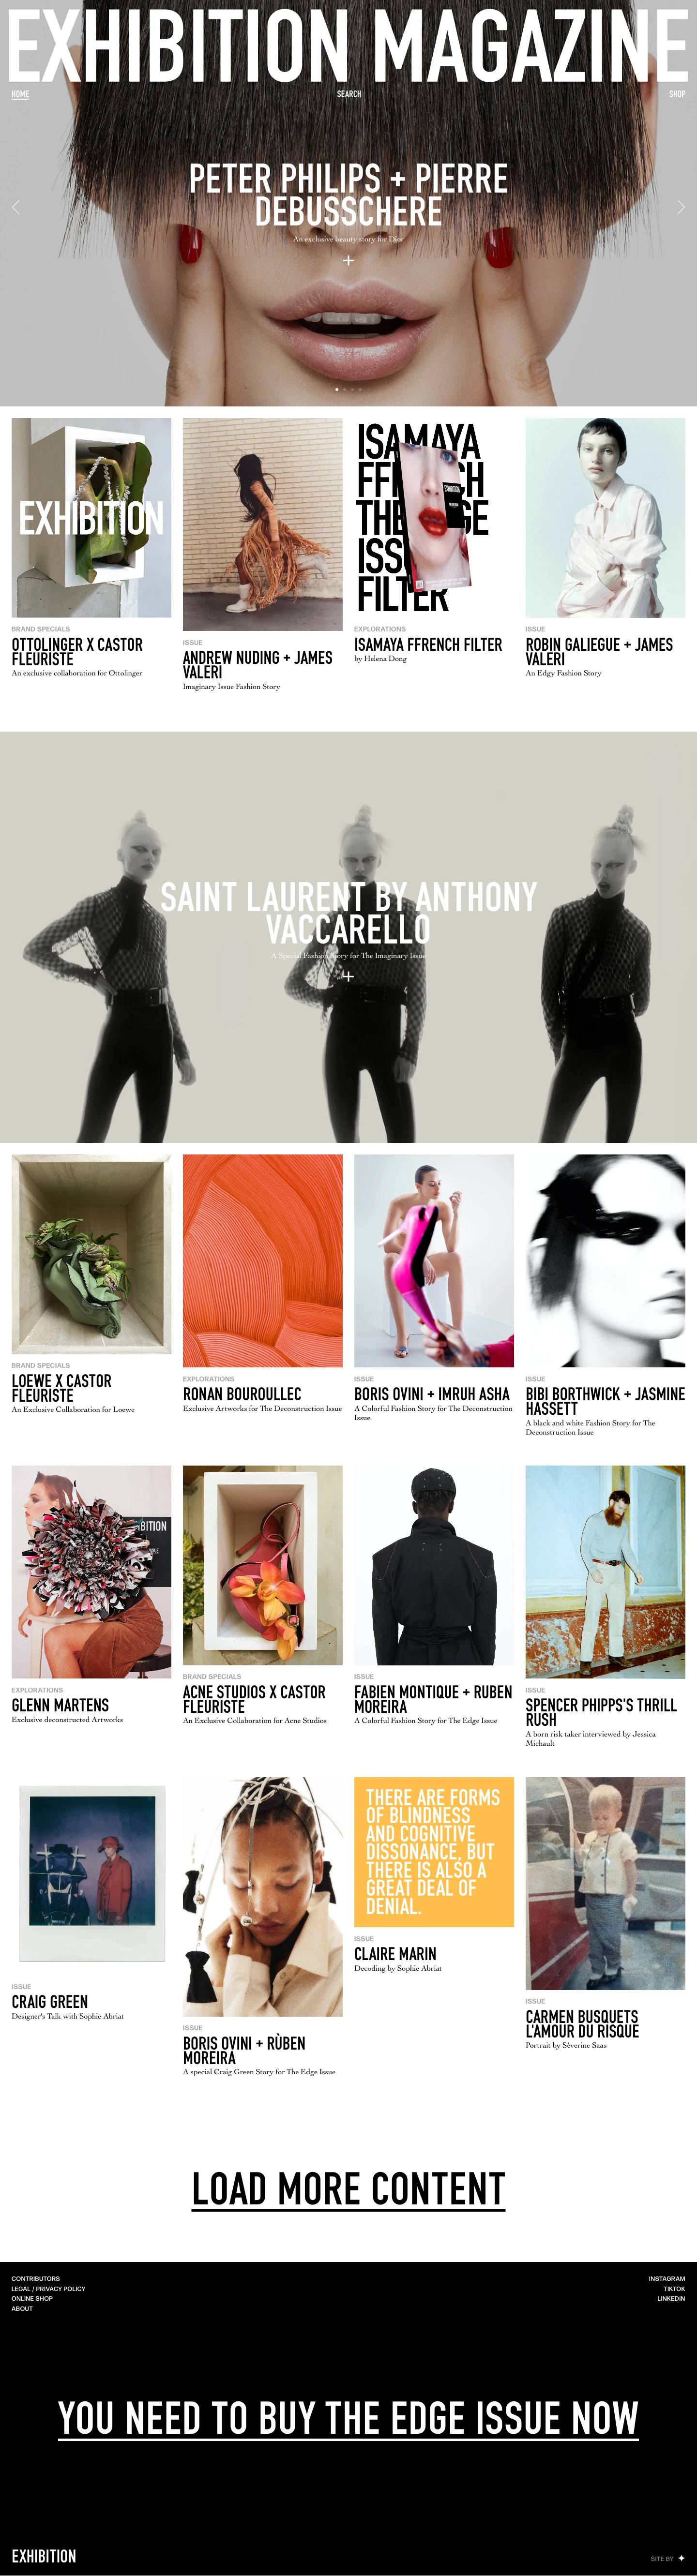 Exhibition Magazine Landing Page Example: Fashion and its specific subjects, at the intersection of know-how and cultures, are the focus of the magazine. Exhibition is conceived as an exhibition space and printed as an art object.